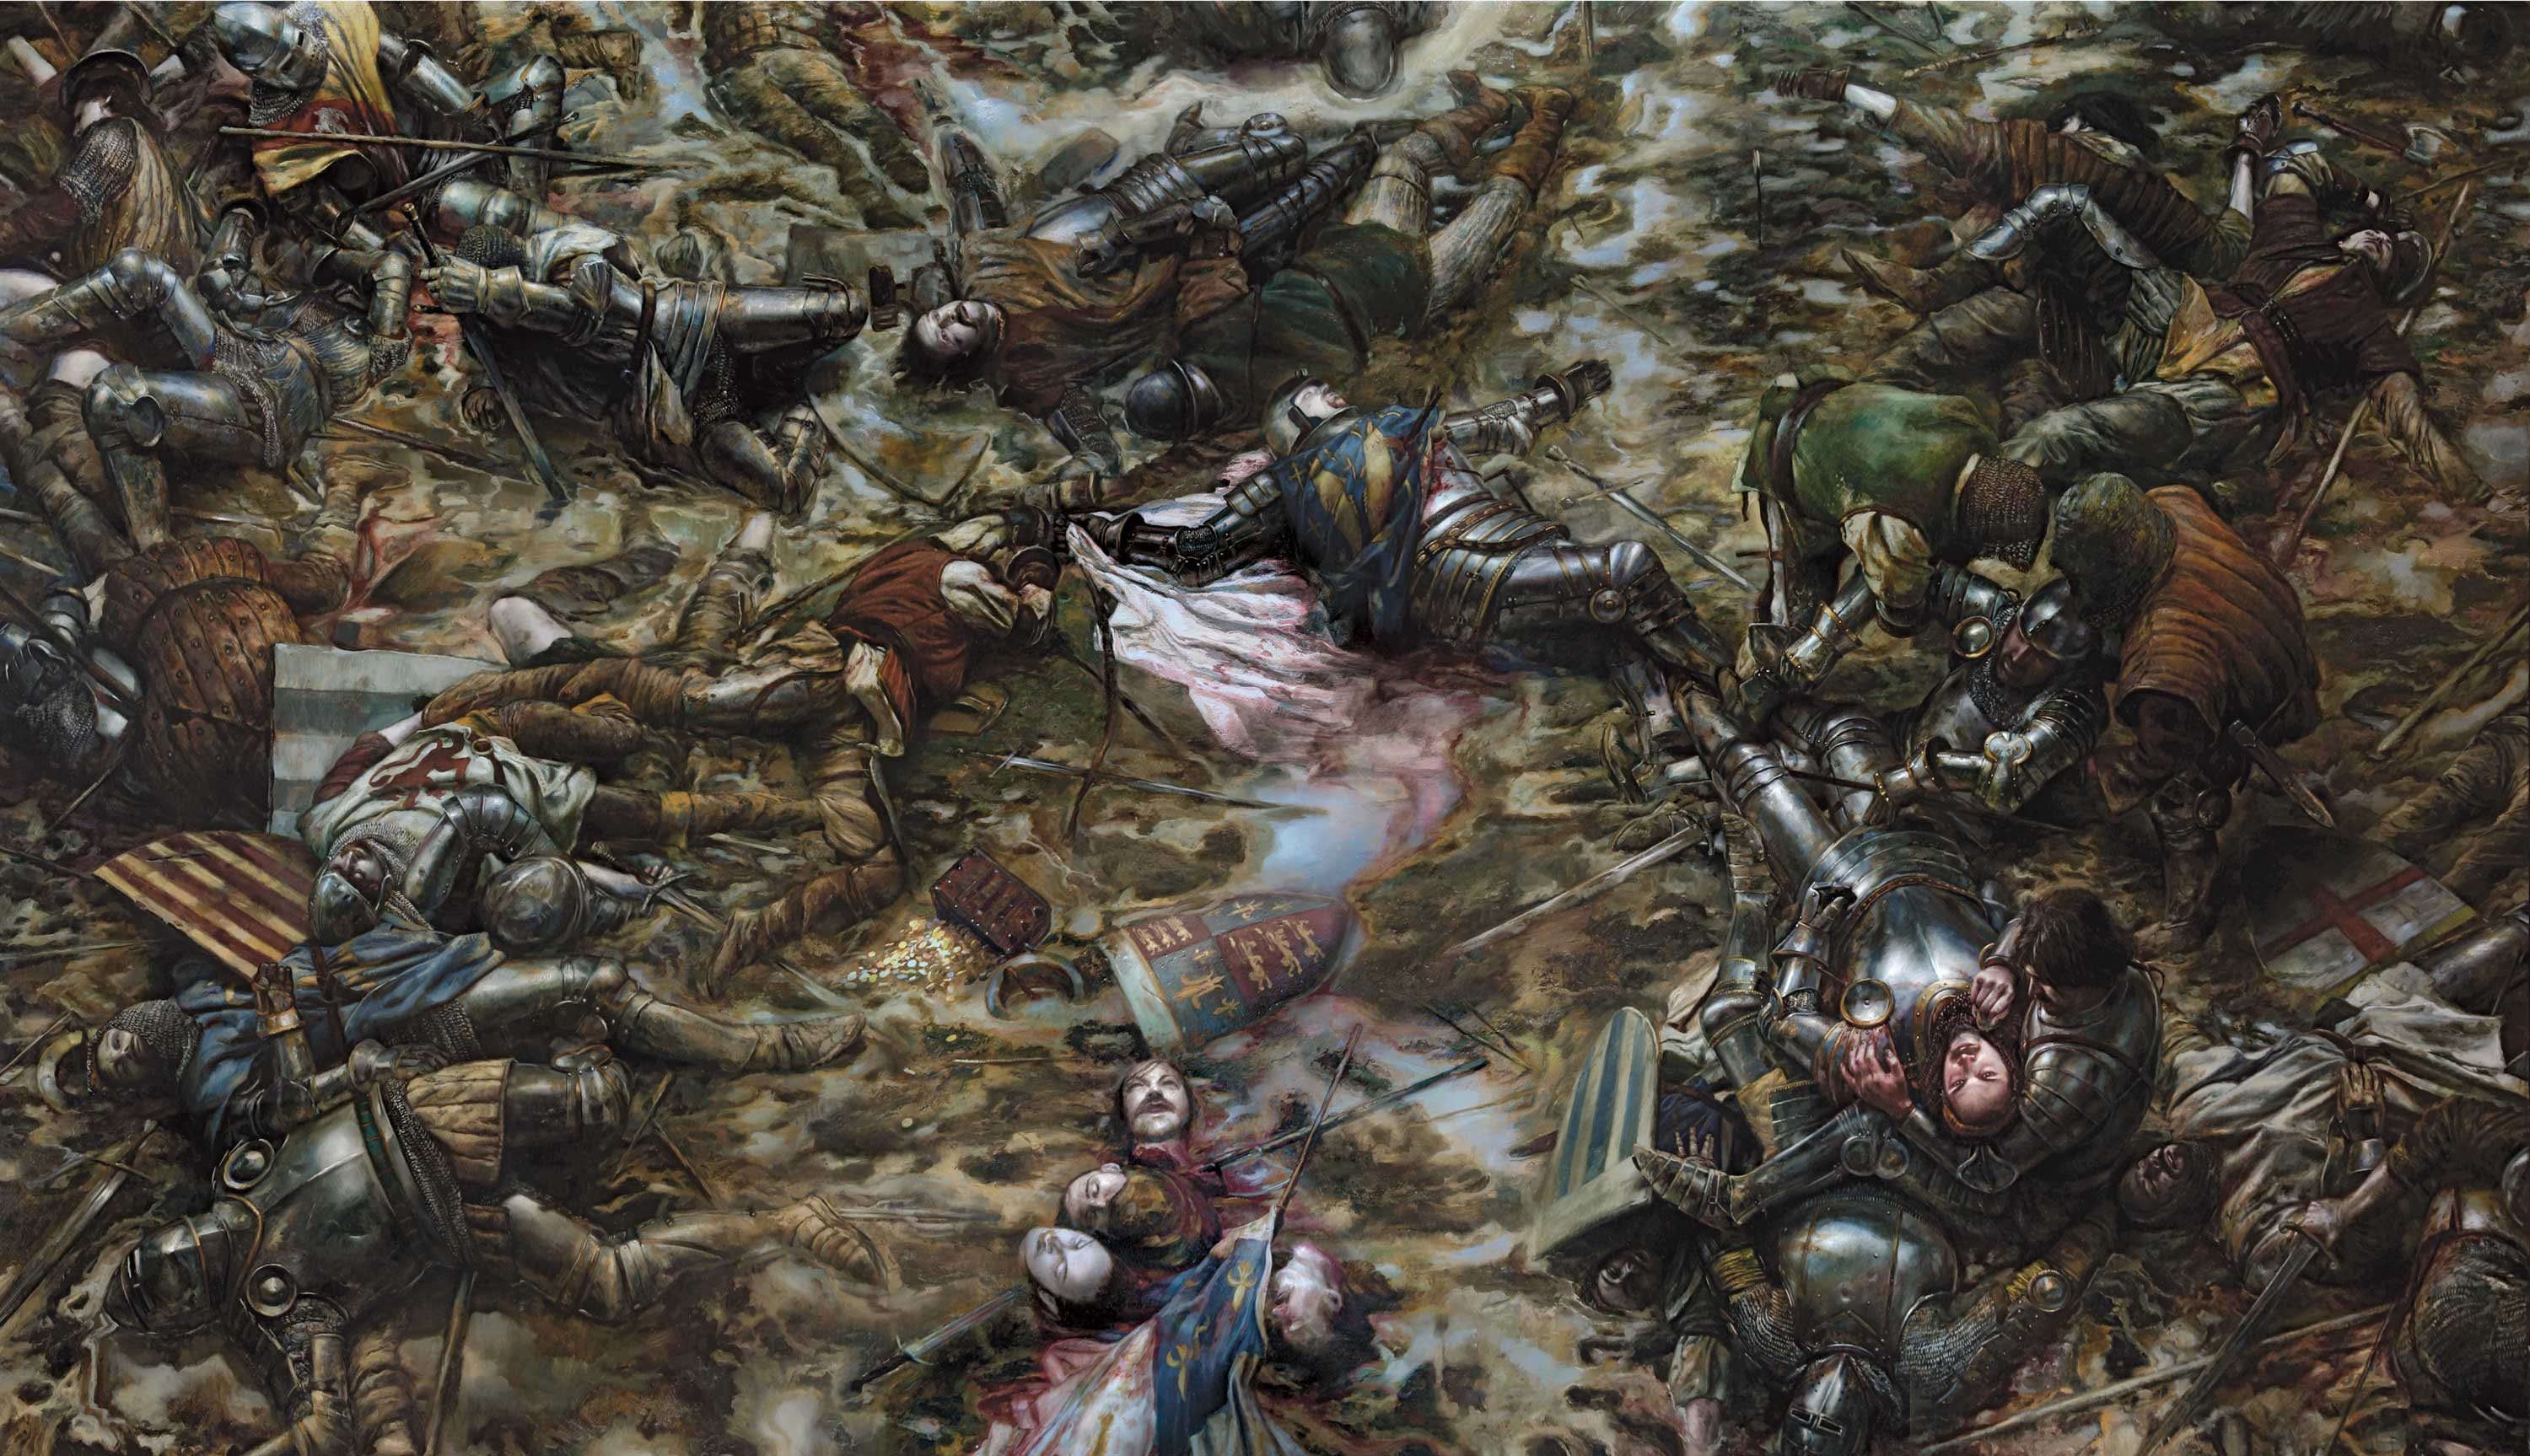 The Battle of Agincourt, 25 October 1415 
center panel of triptych
48" x 84"  Oil on Panel
Collection of Scot Tubbs